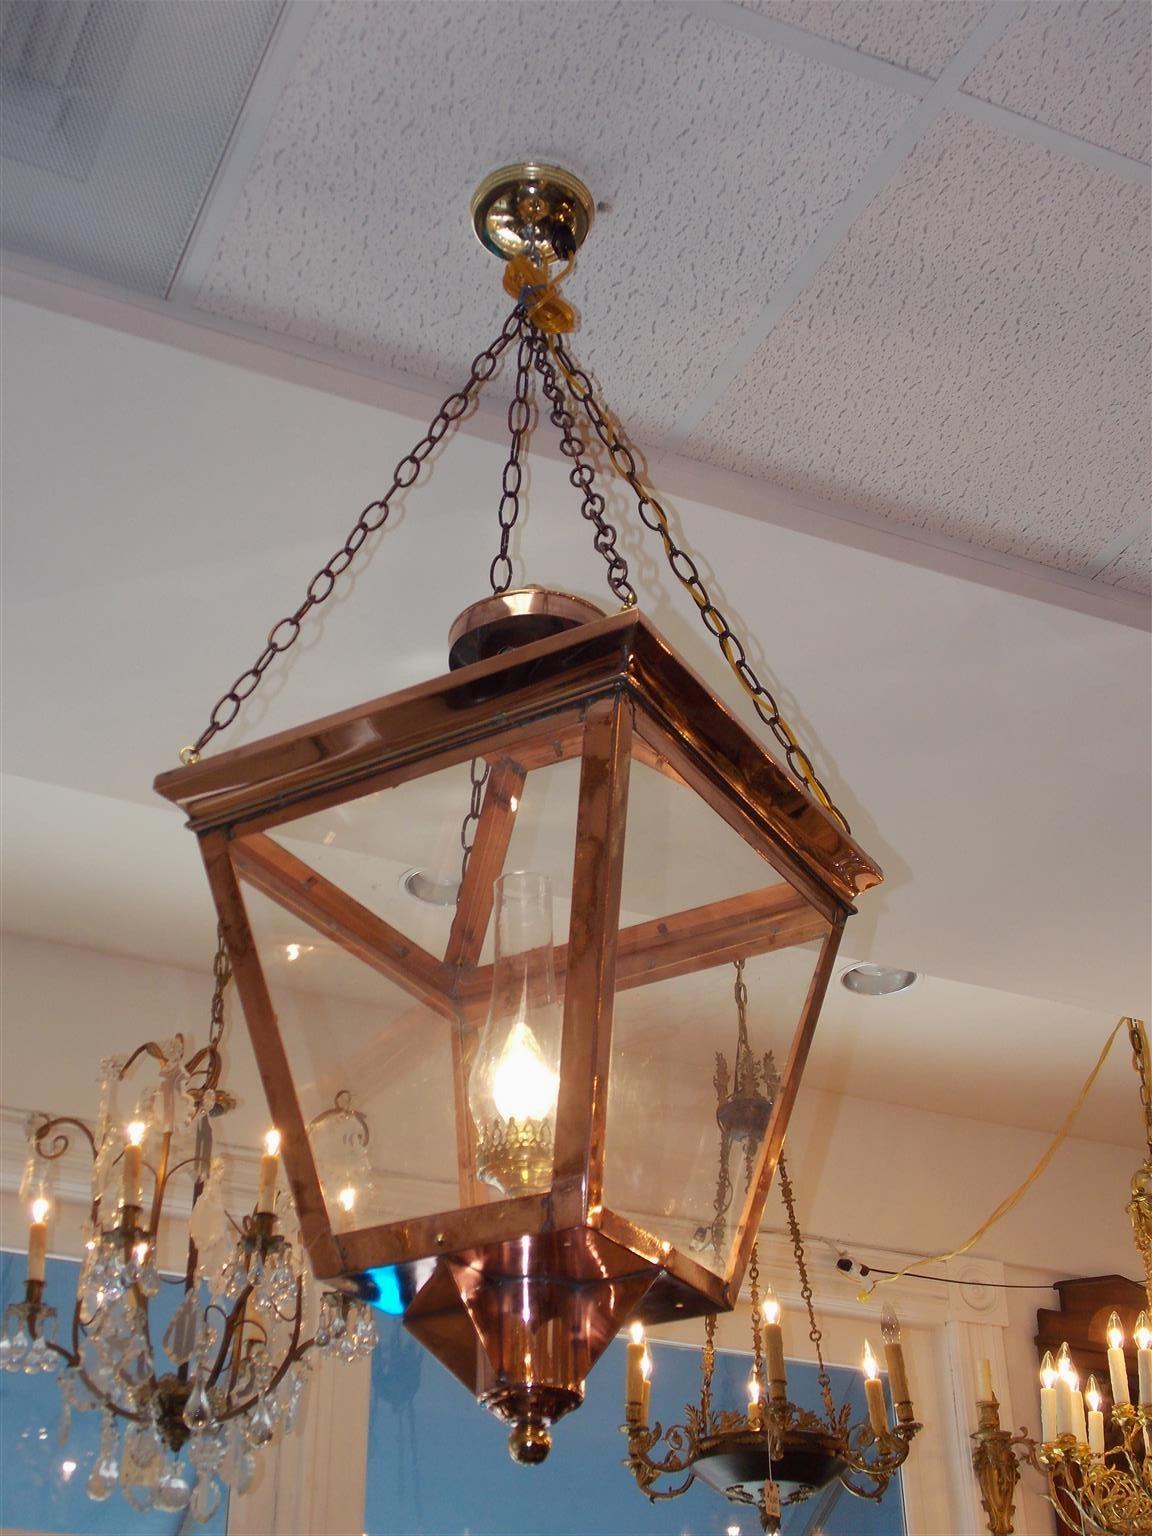 Pair of American copper and brass hanging glass lanterns with circular bulbous vented finials, four sided glass panels, locking hinged door, and electrified with a single brass centered light and chimney. Early 19th century. Lanterns were originally